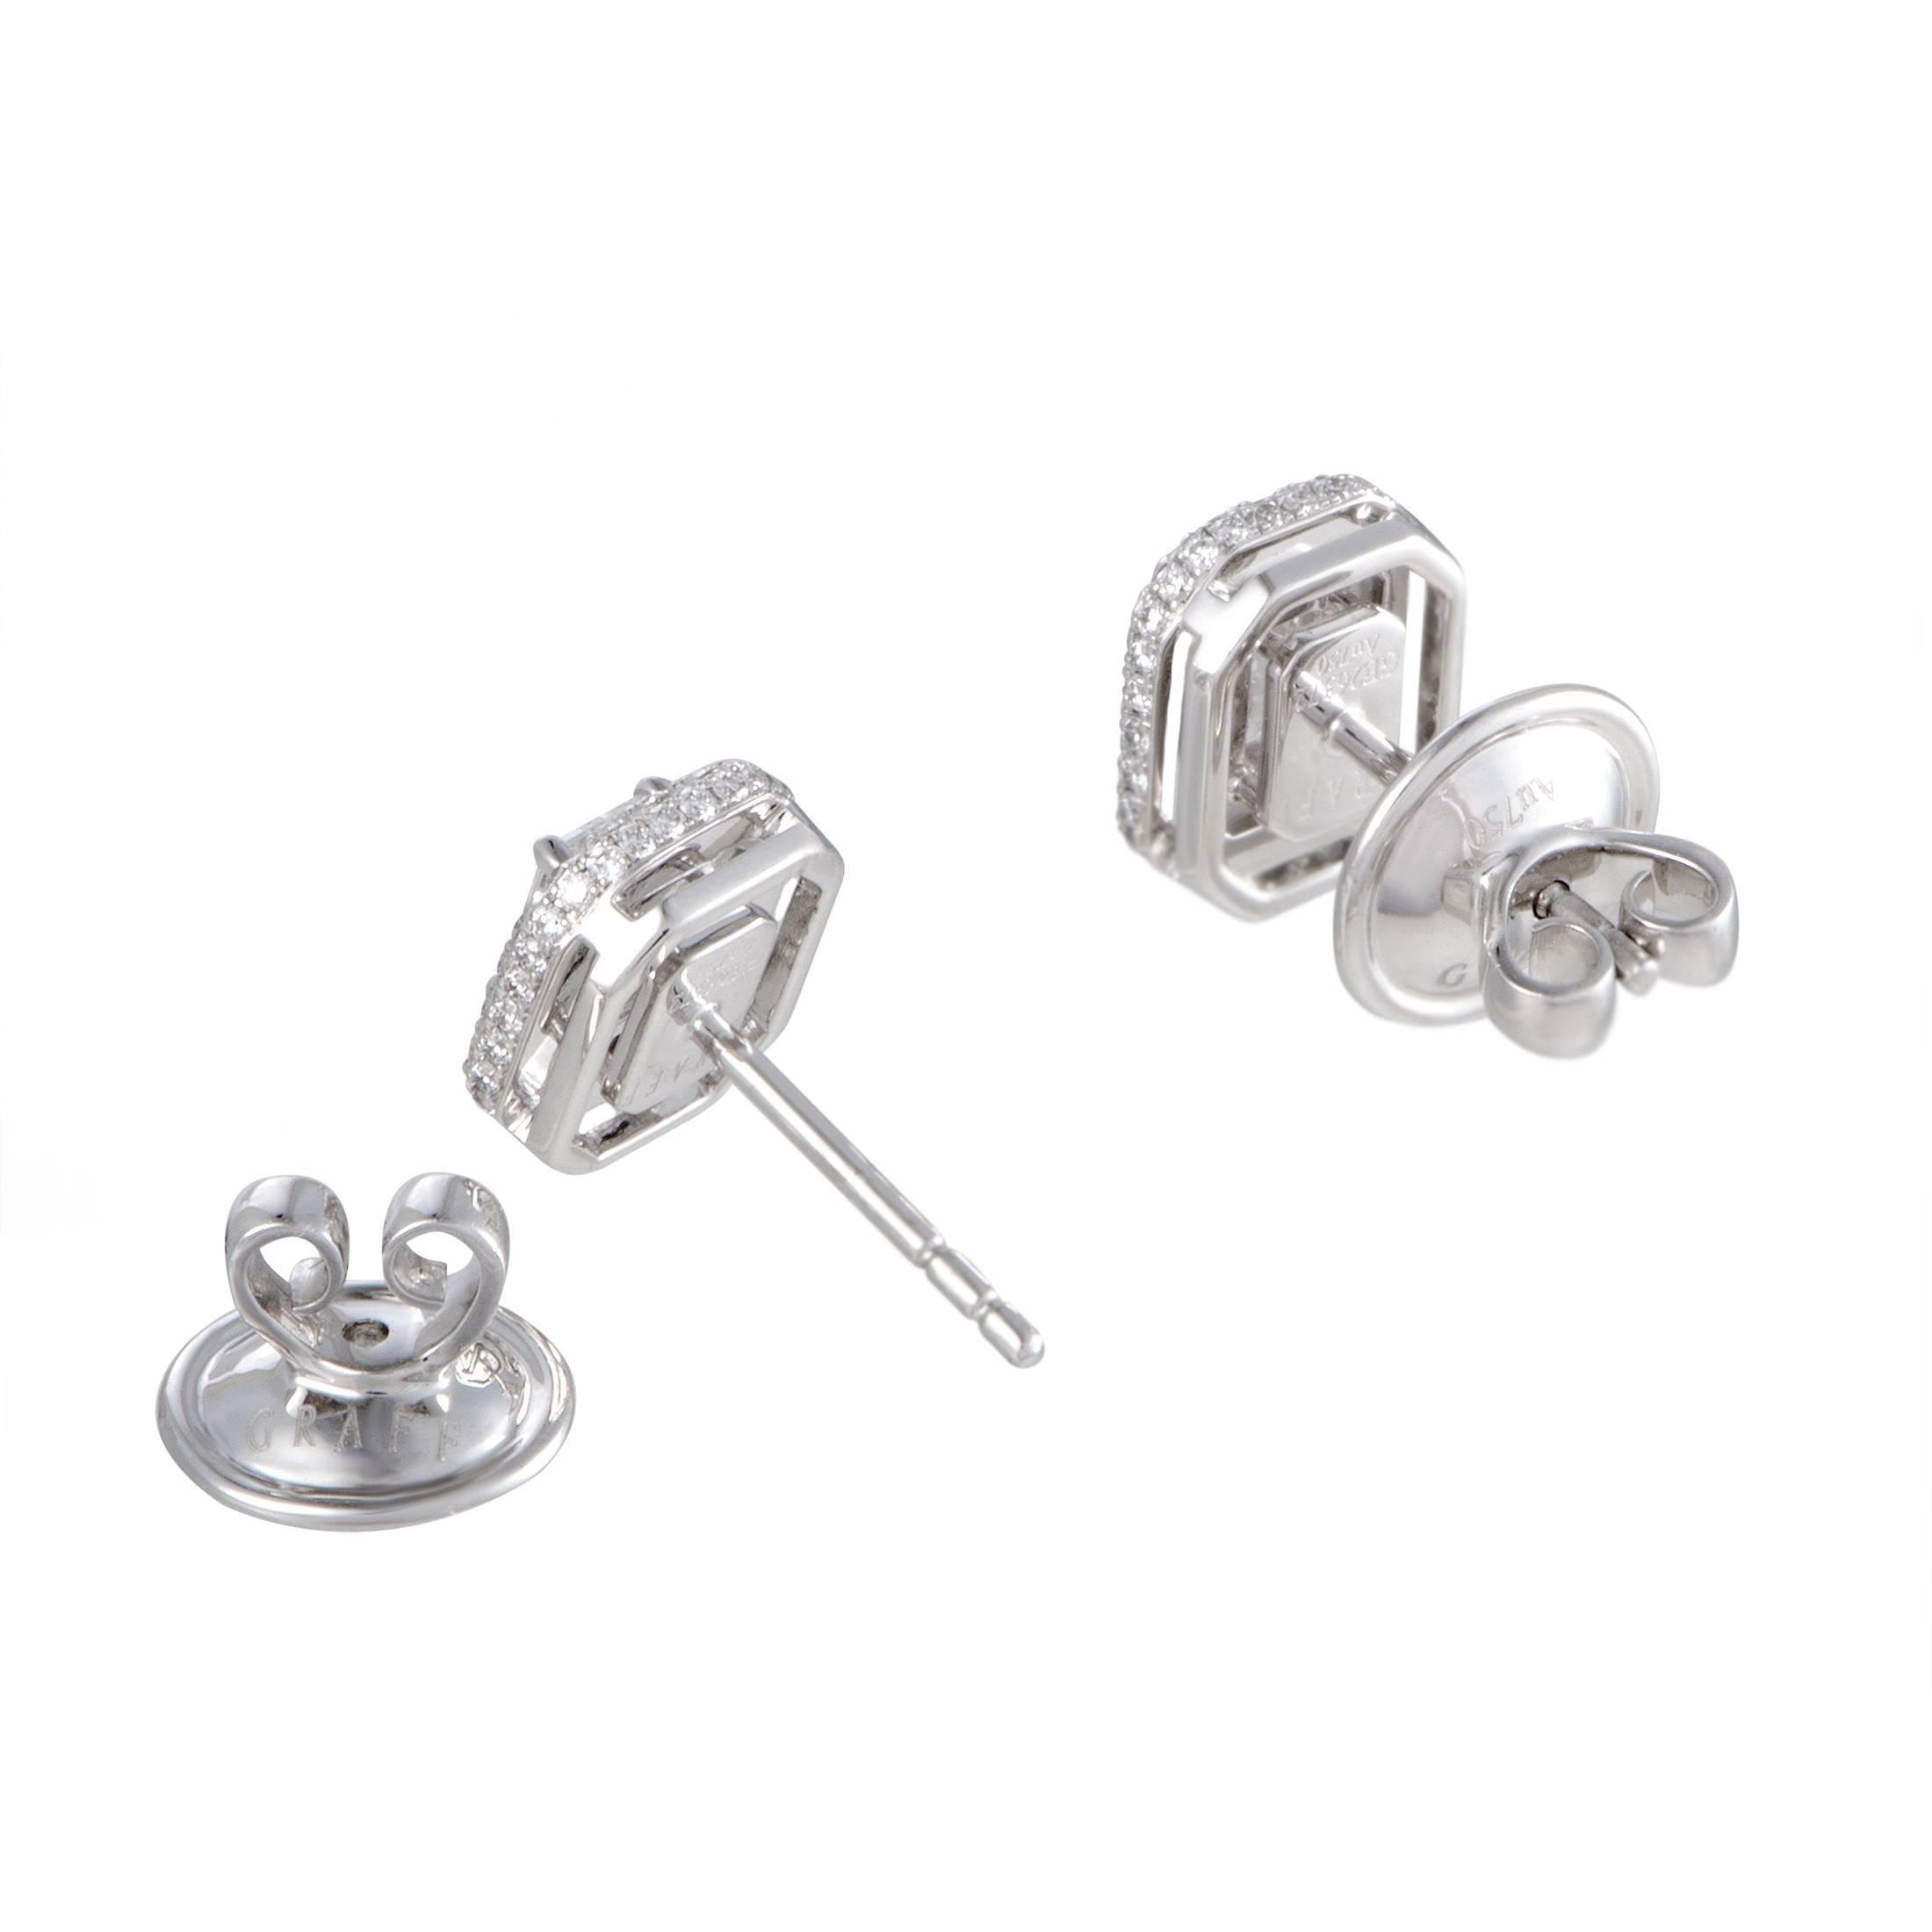 If you accept nothing short of absolute prestige and refinement when it comes to jewelry, than this exquisite pair of earrings from Graff is the perfect addition to your collection. The pair is made of elegant 18K white gold and each earring is set